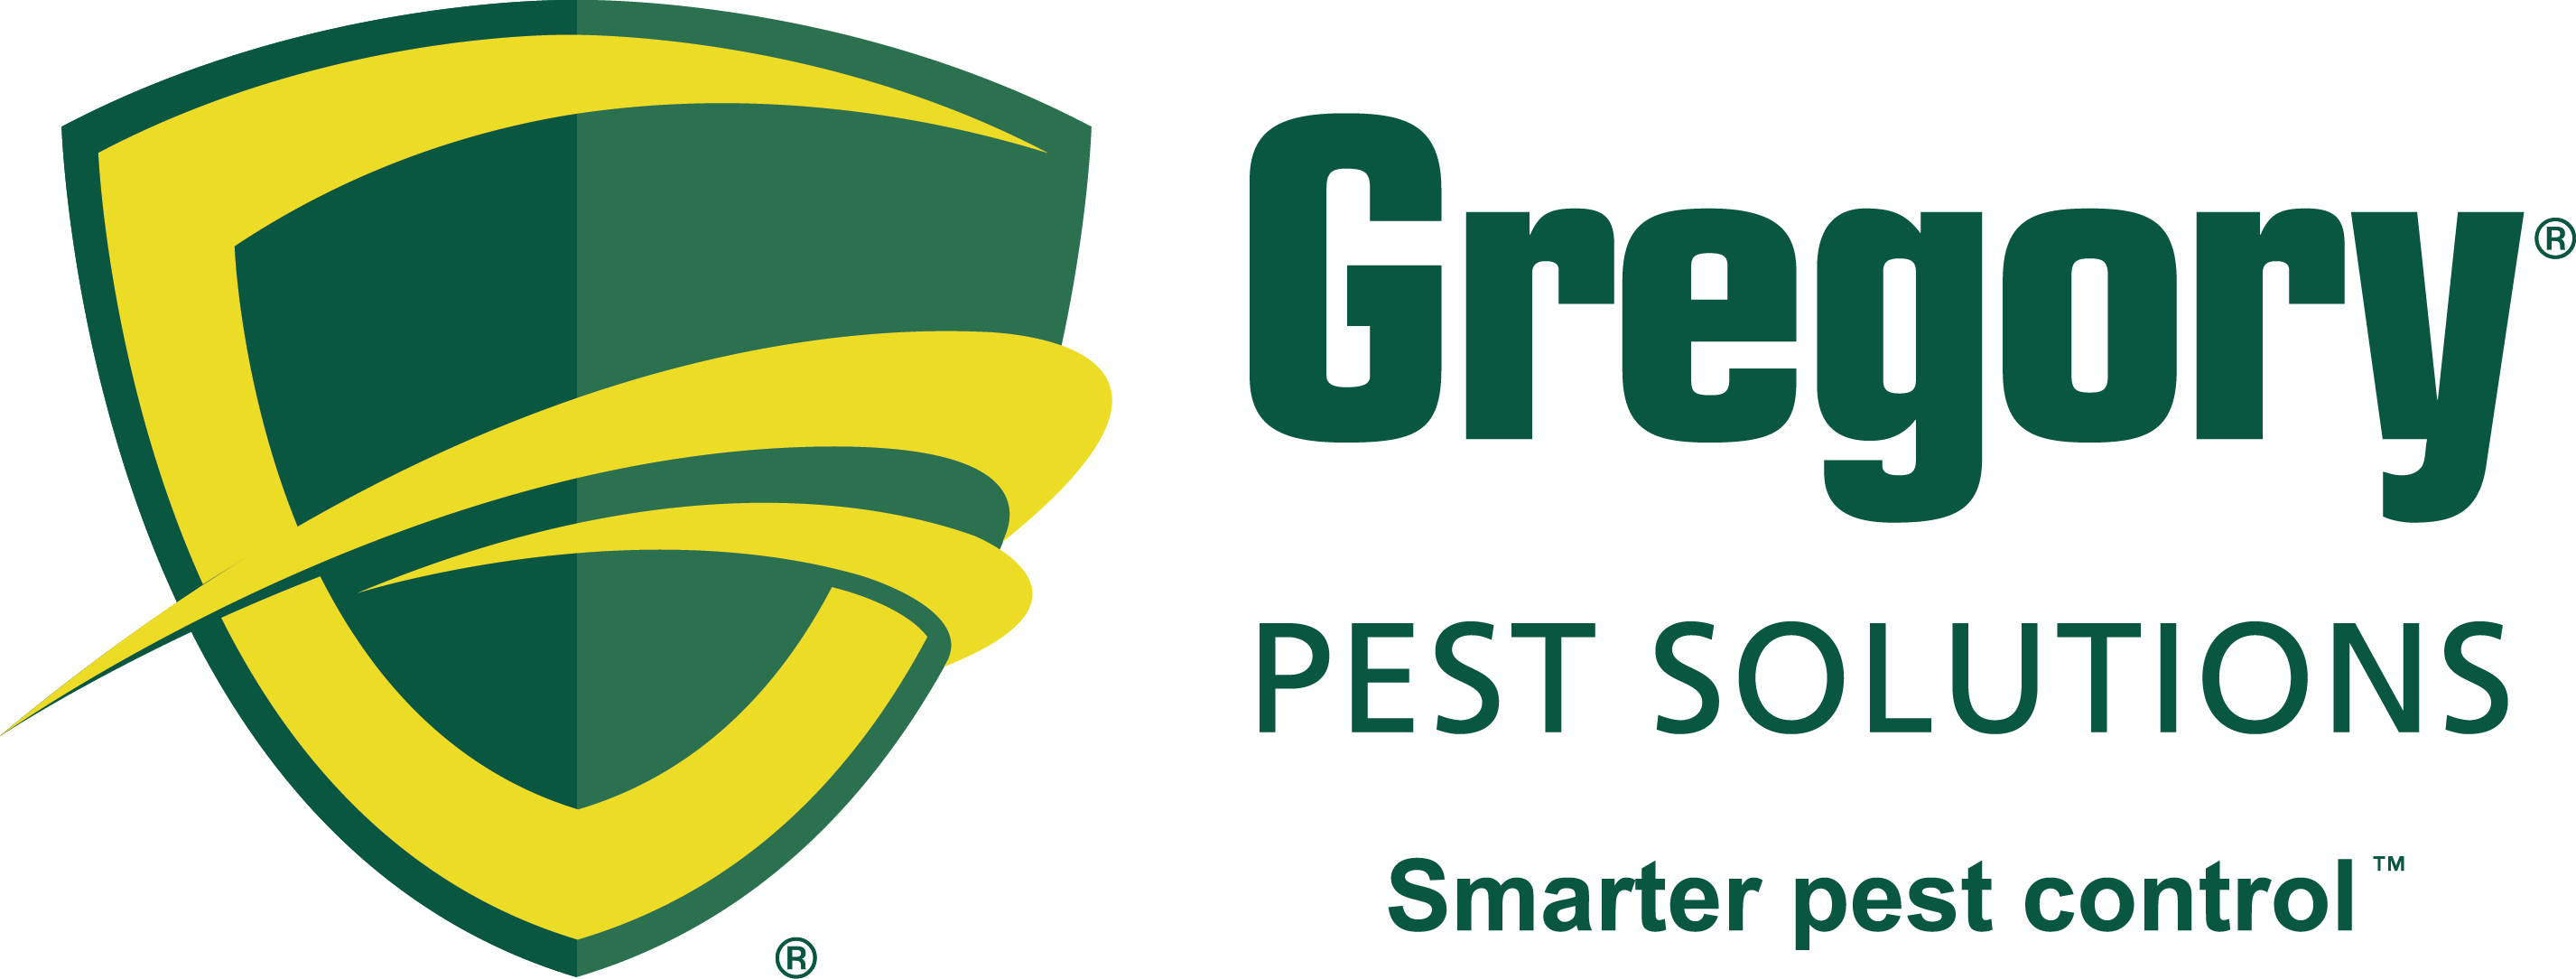 Gregory Logo - Gregory Pest Solutions Logo - Greenville Symphony Orchestra